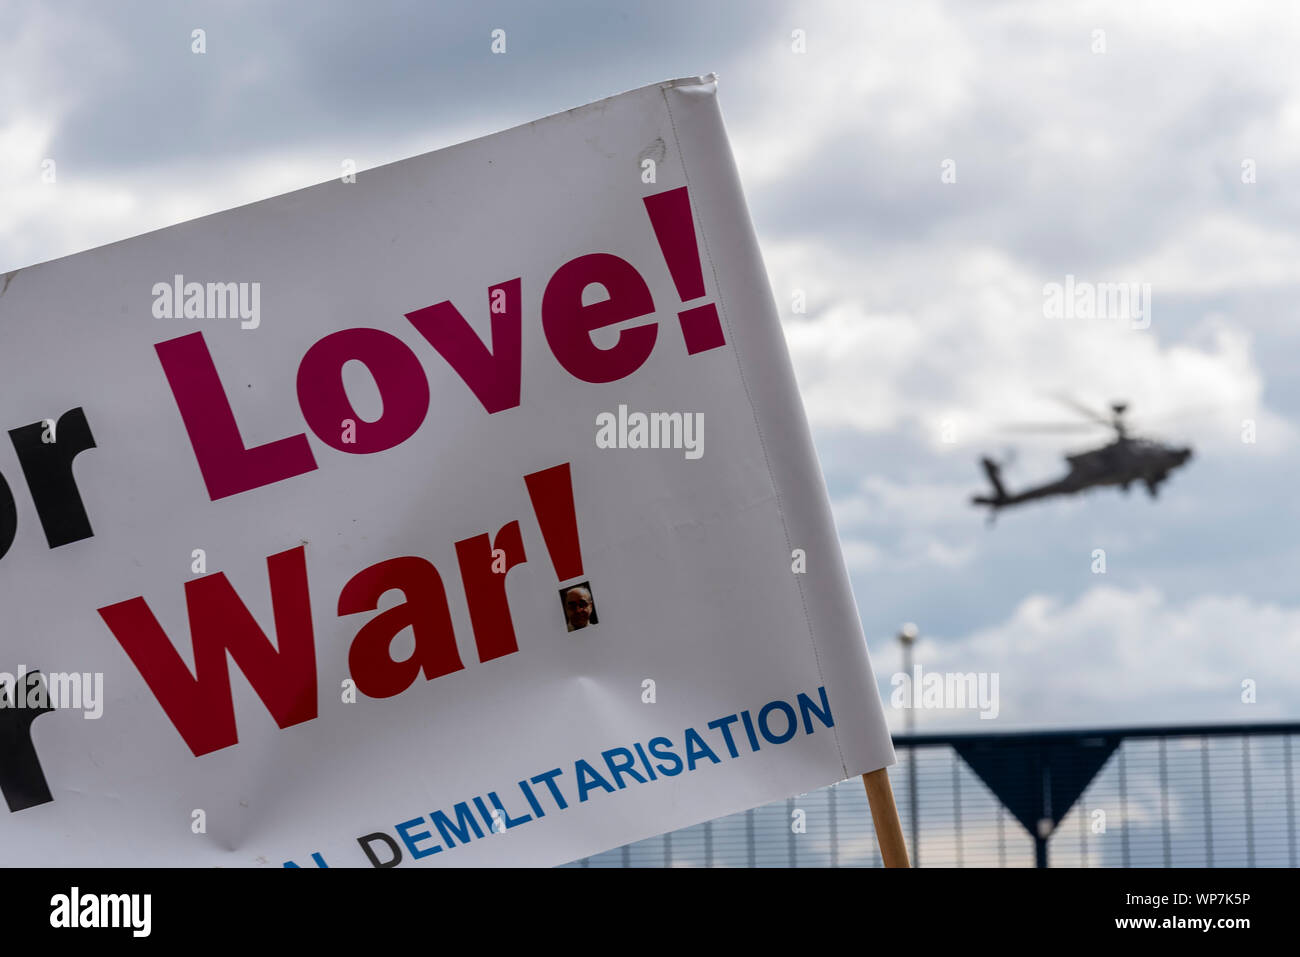 US Army AH-64 Apache gunship landing at Defence & Security Equipment International DSEI arms fair trade show, ExCel, London, UK. Protest banner Stock Photo